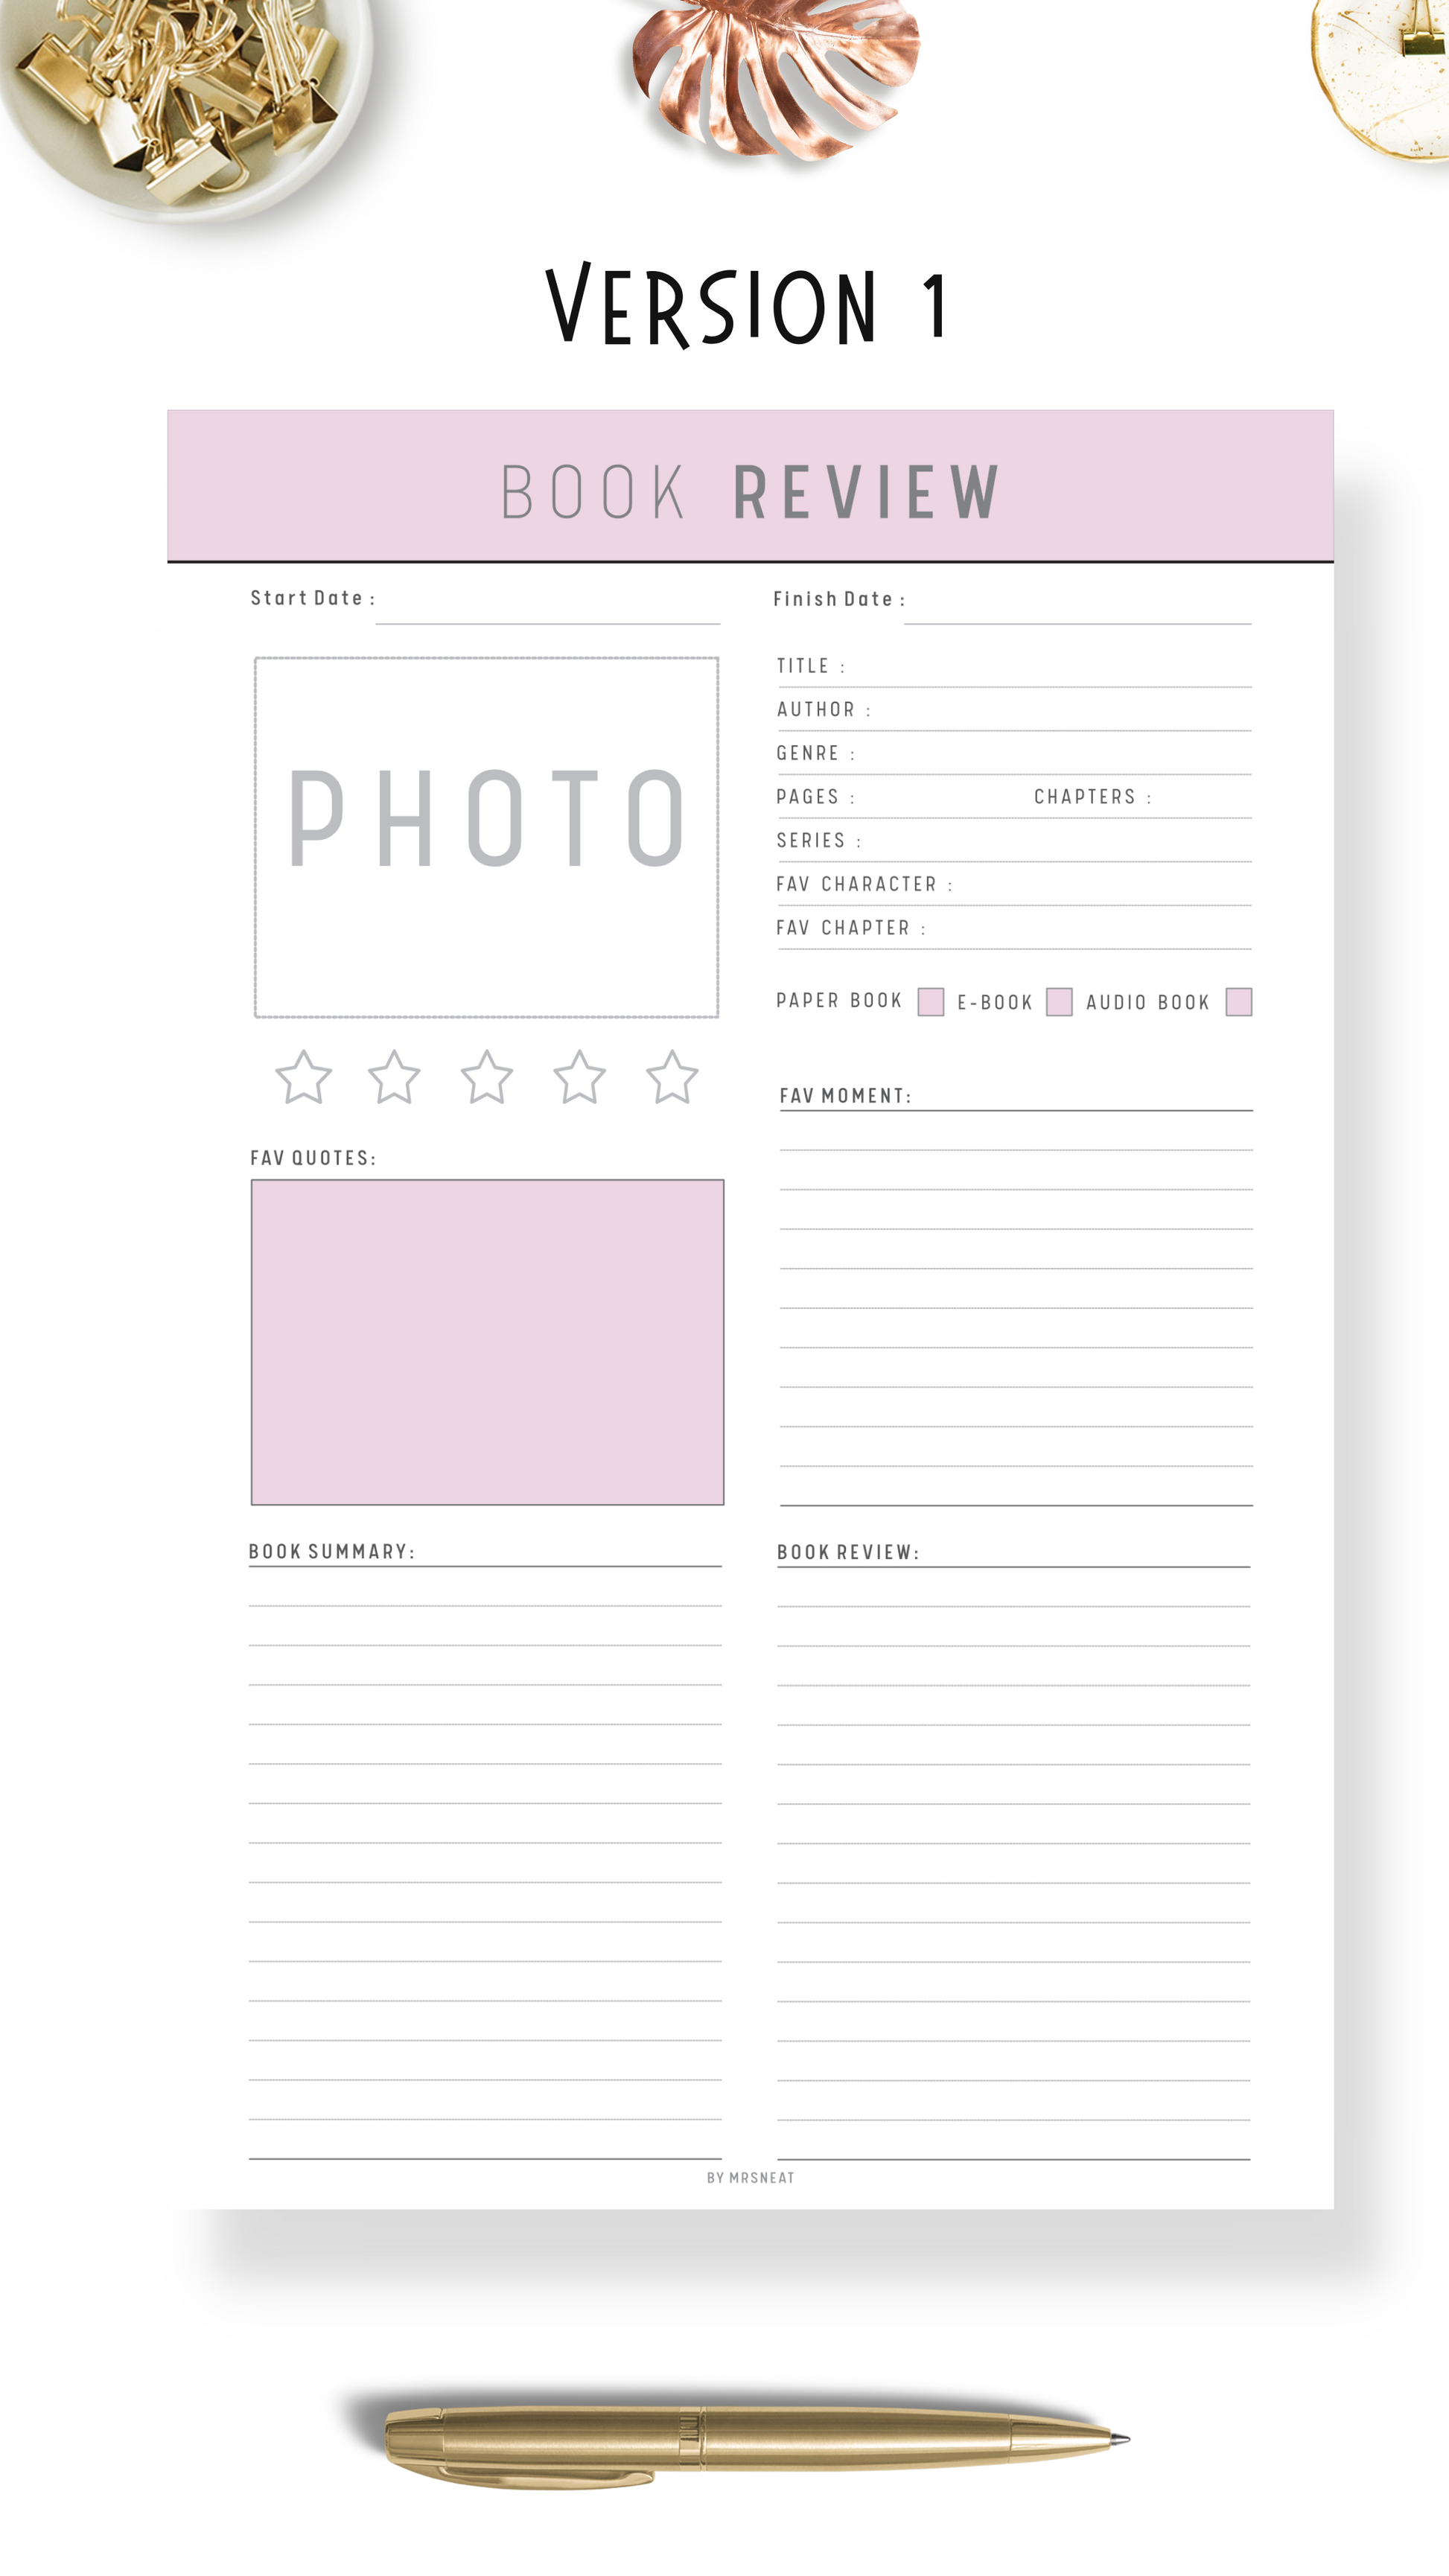 Book Review Planner with room for Photo, Book Title, author, genre, favorite character and quotes in beautiful pink color